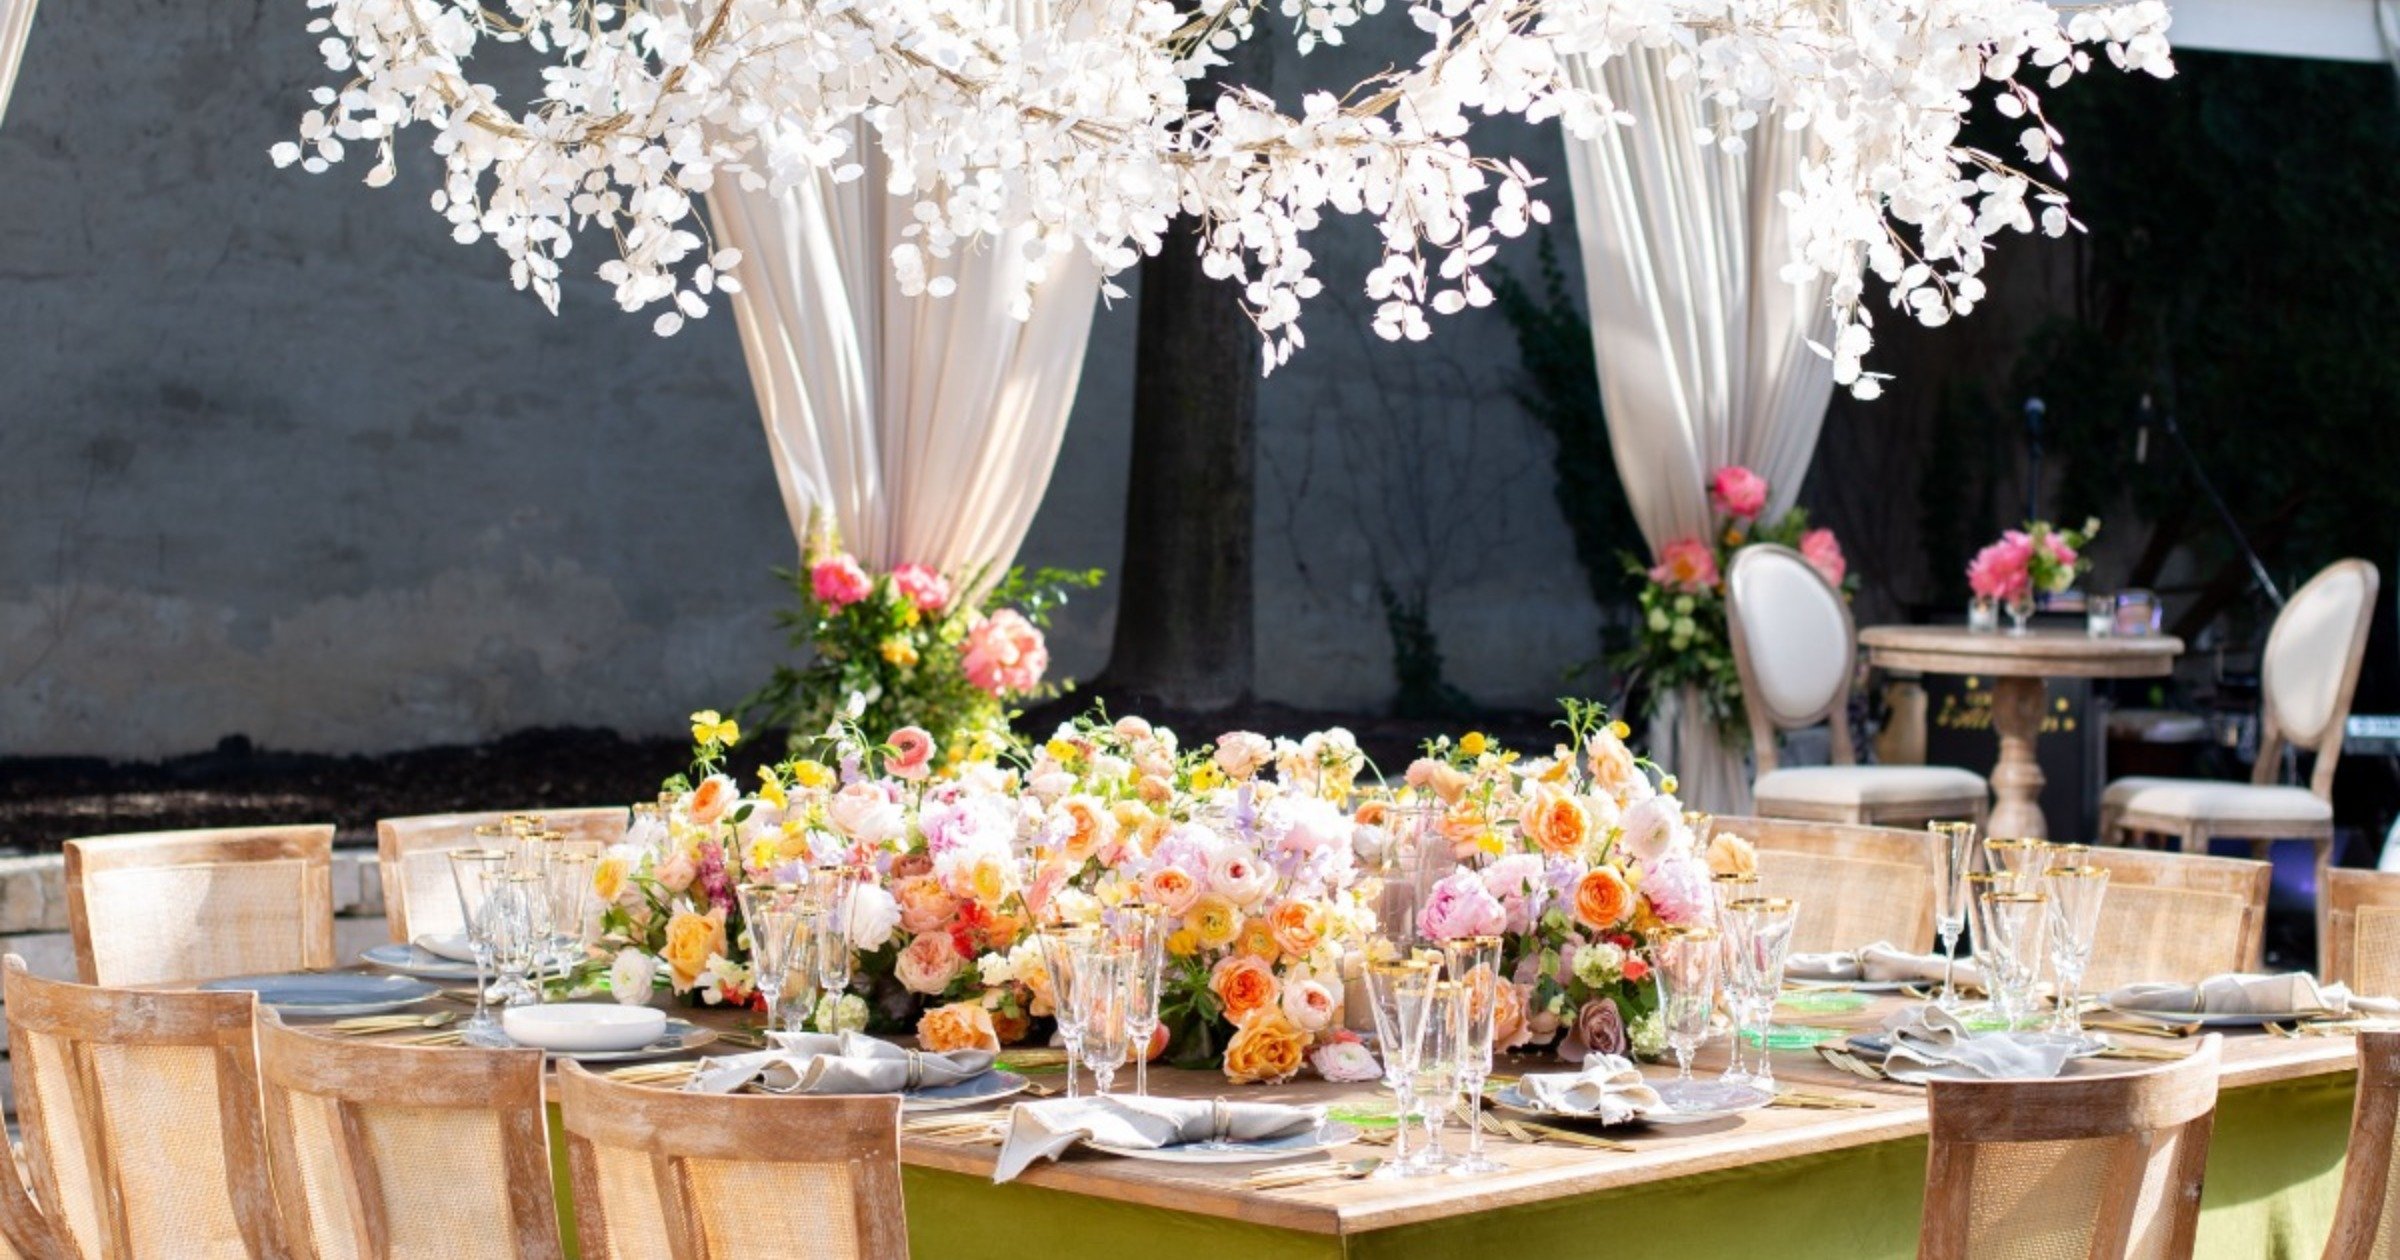 Vibrant Intimate Wedding with Personalized Gifts for Each Guest